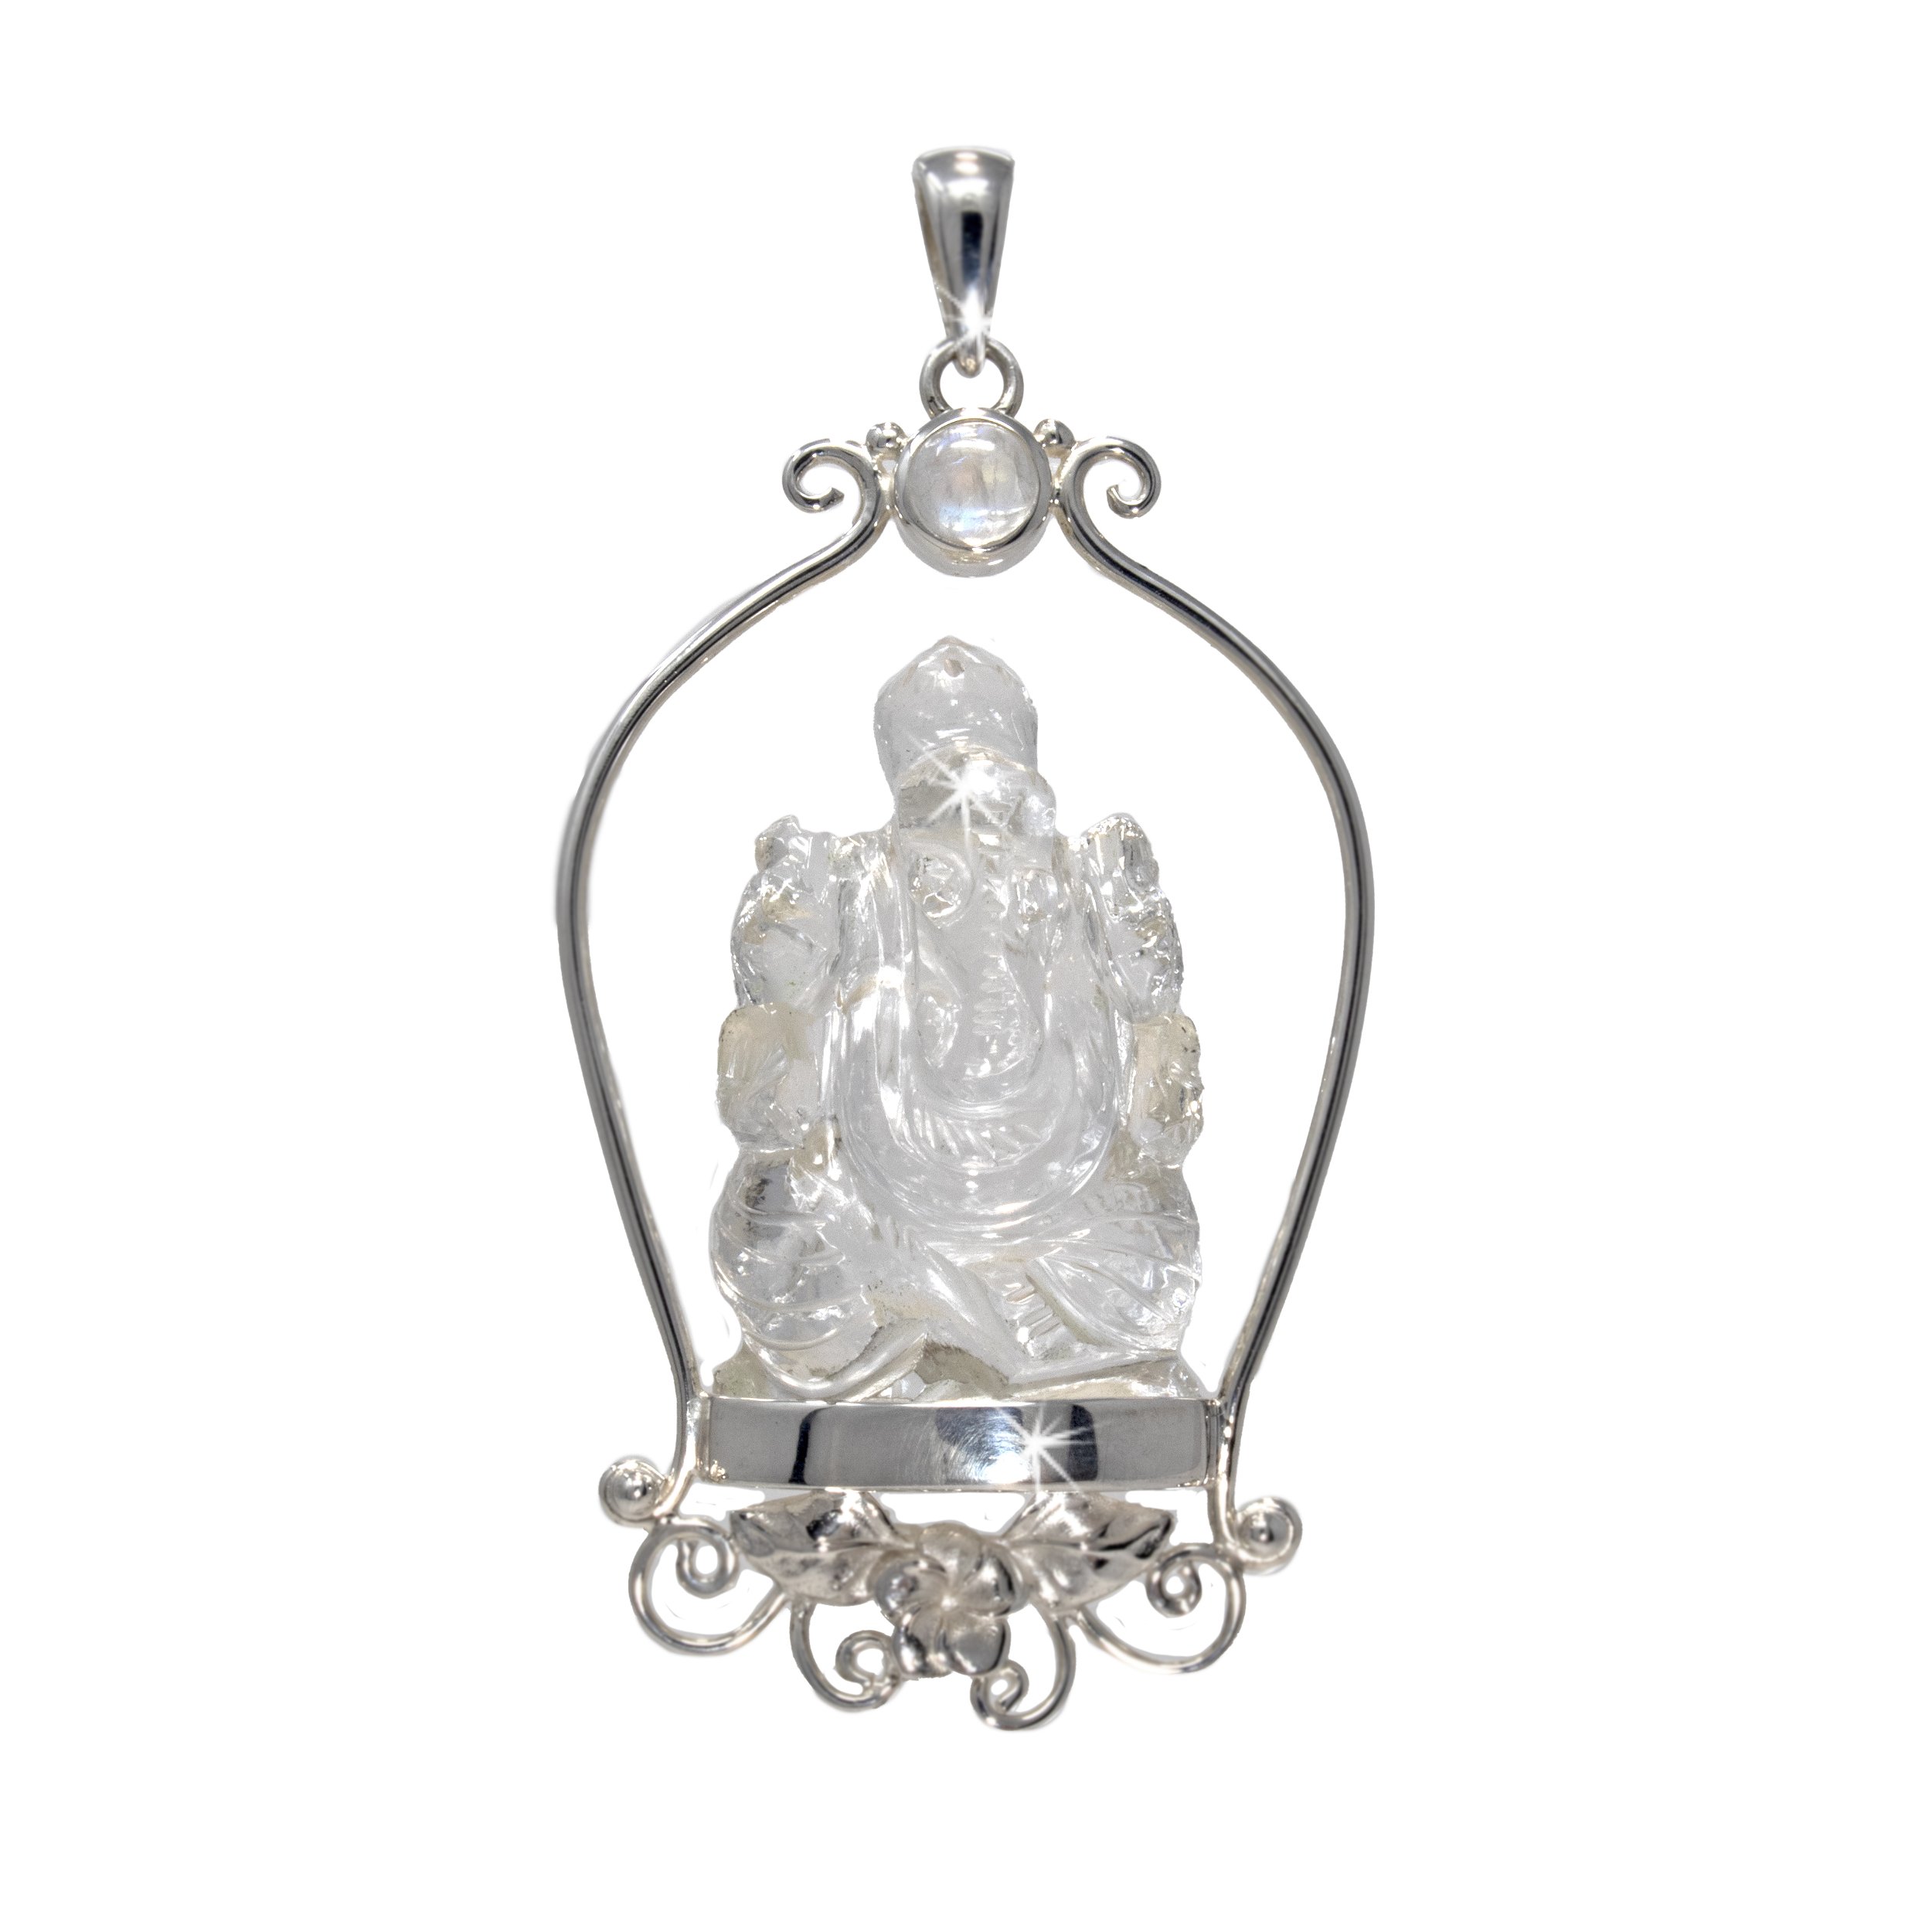 Carved Ganesha Quartz Pendant With Round Rainbow Moonstone Cabochon Set On Silver Perch With Leaves & Filigree On Bottom